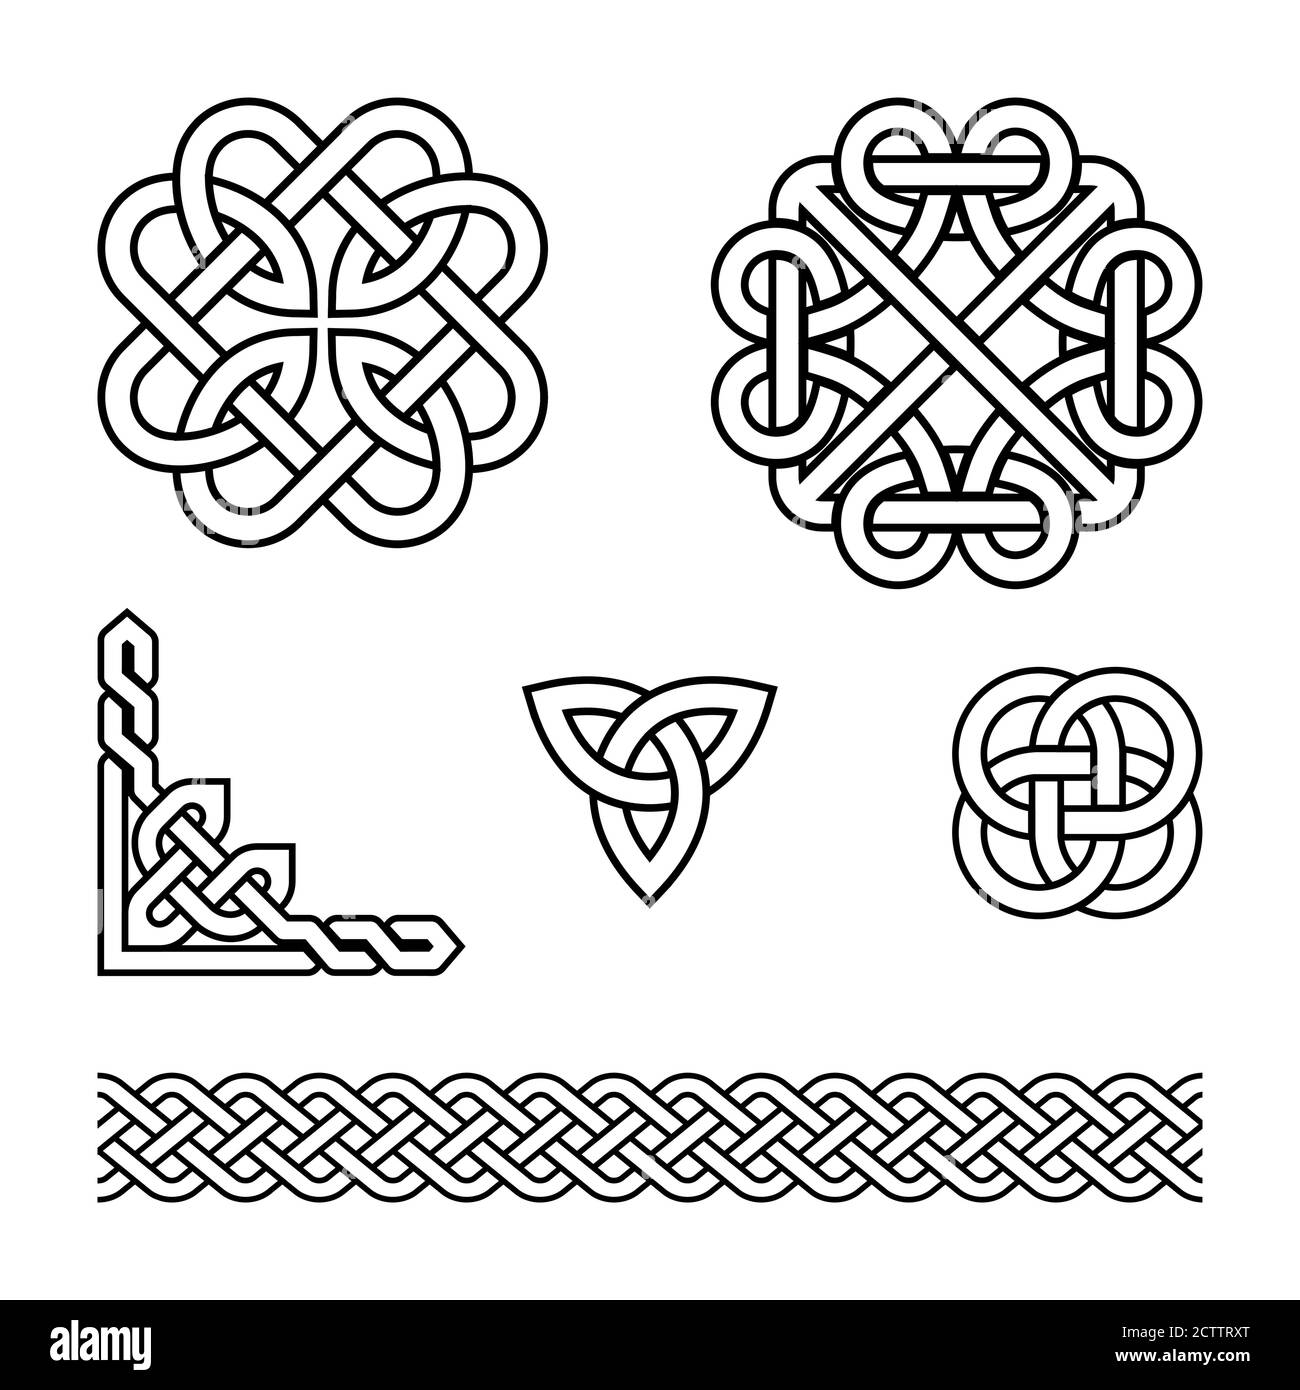 Celtic vector pattern set - braids and knots with stroke, irish traditional design elements collection Stock Vector